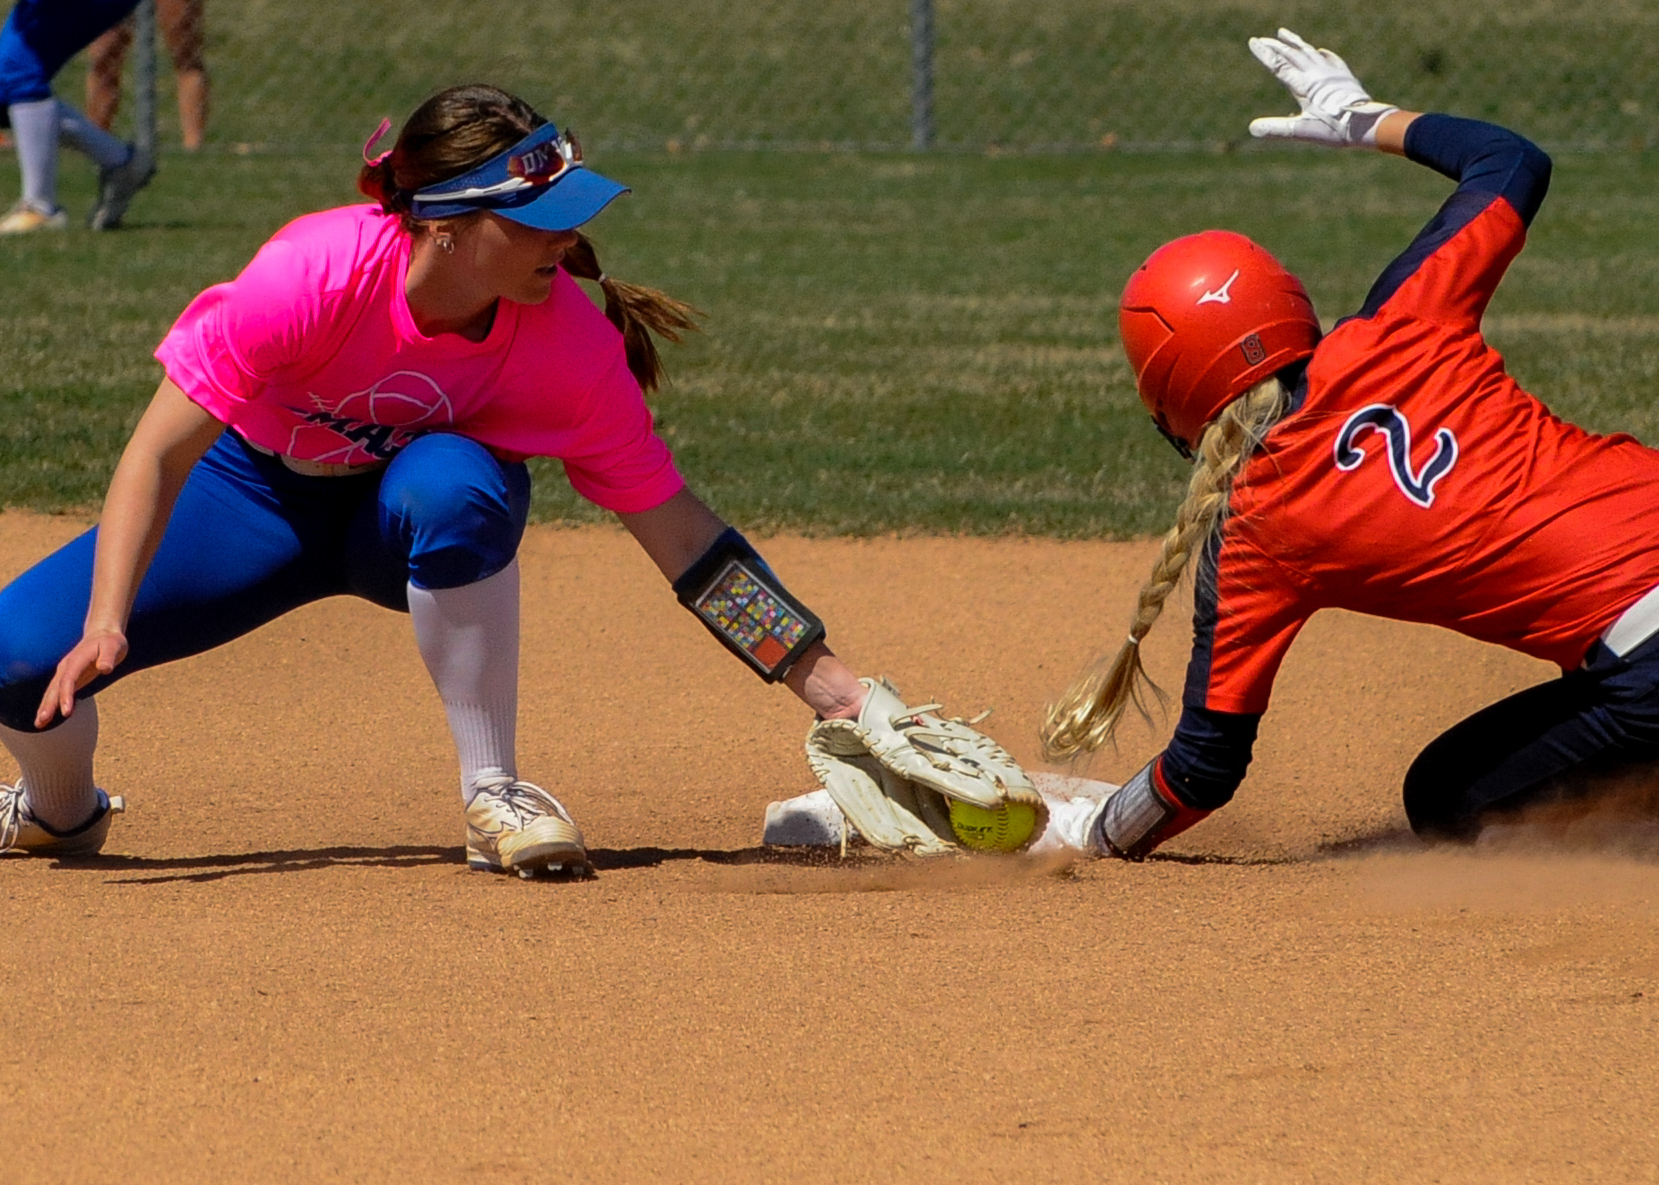 DMACC softball team sweeps doubleheader from SWCC, 19-0 and 15-1